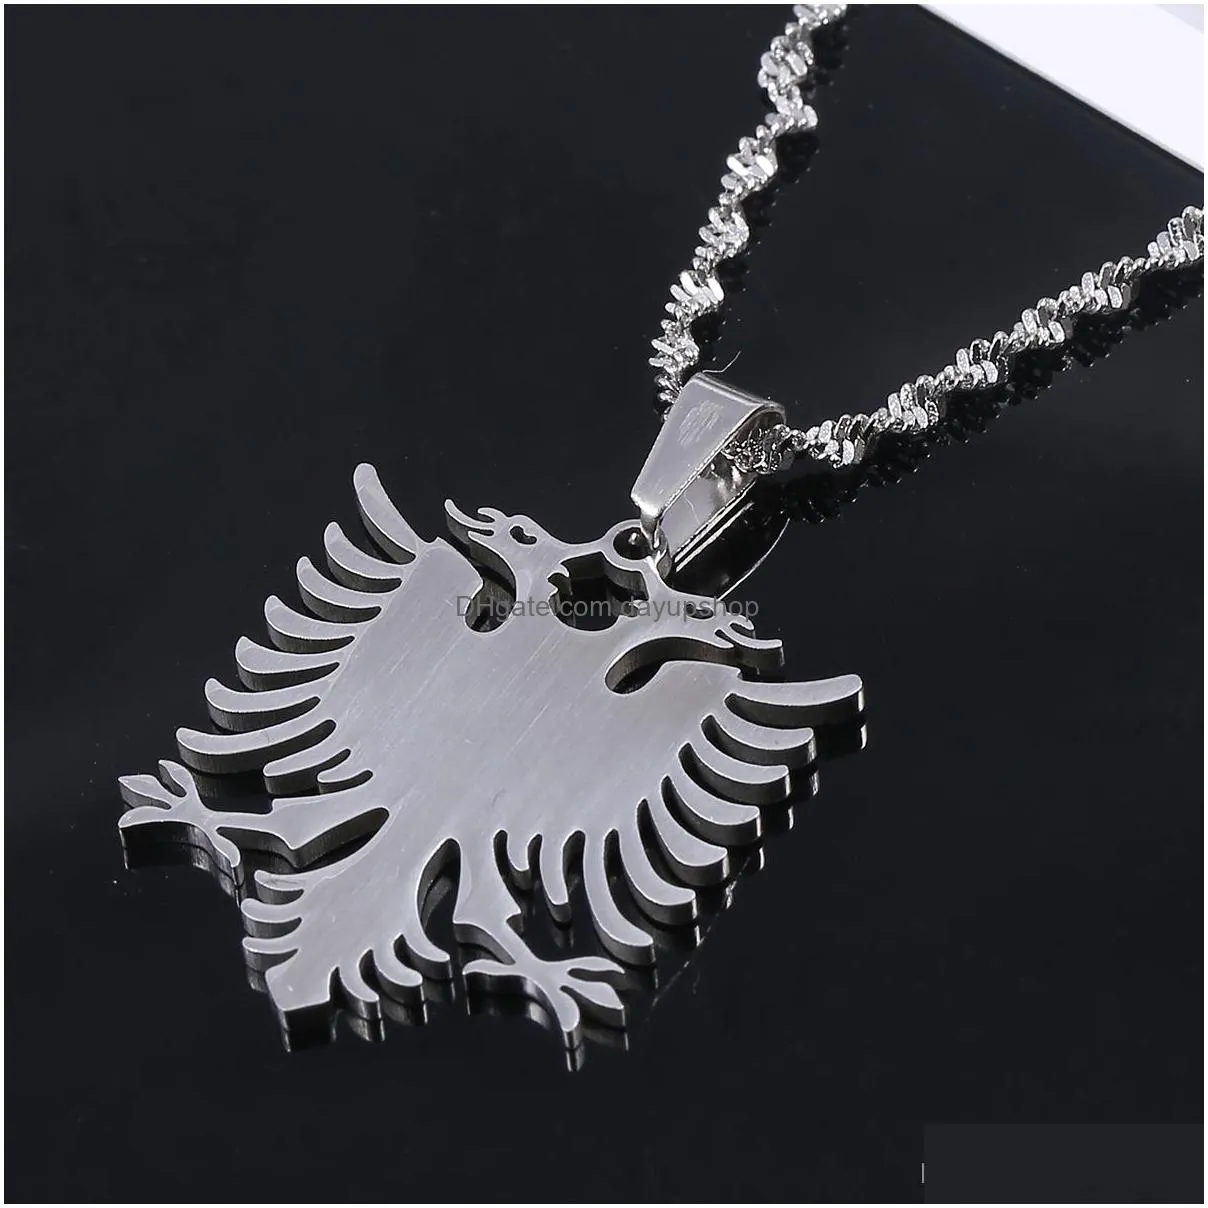 albania eagle pendant necklaces gold color stainless steel ethnic trendy jewelry gifts